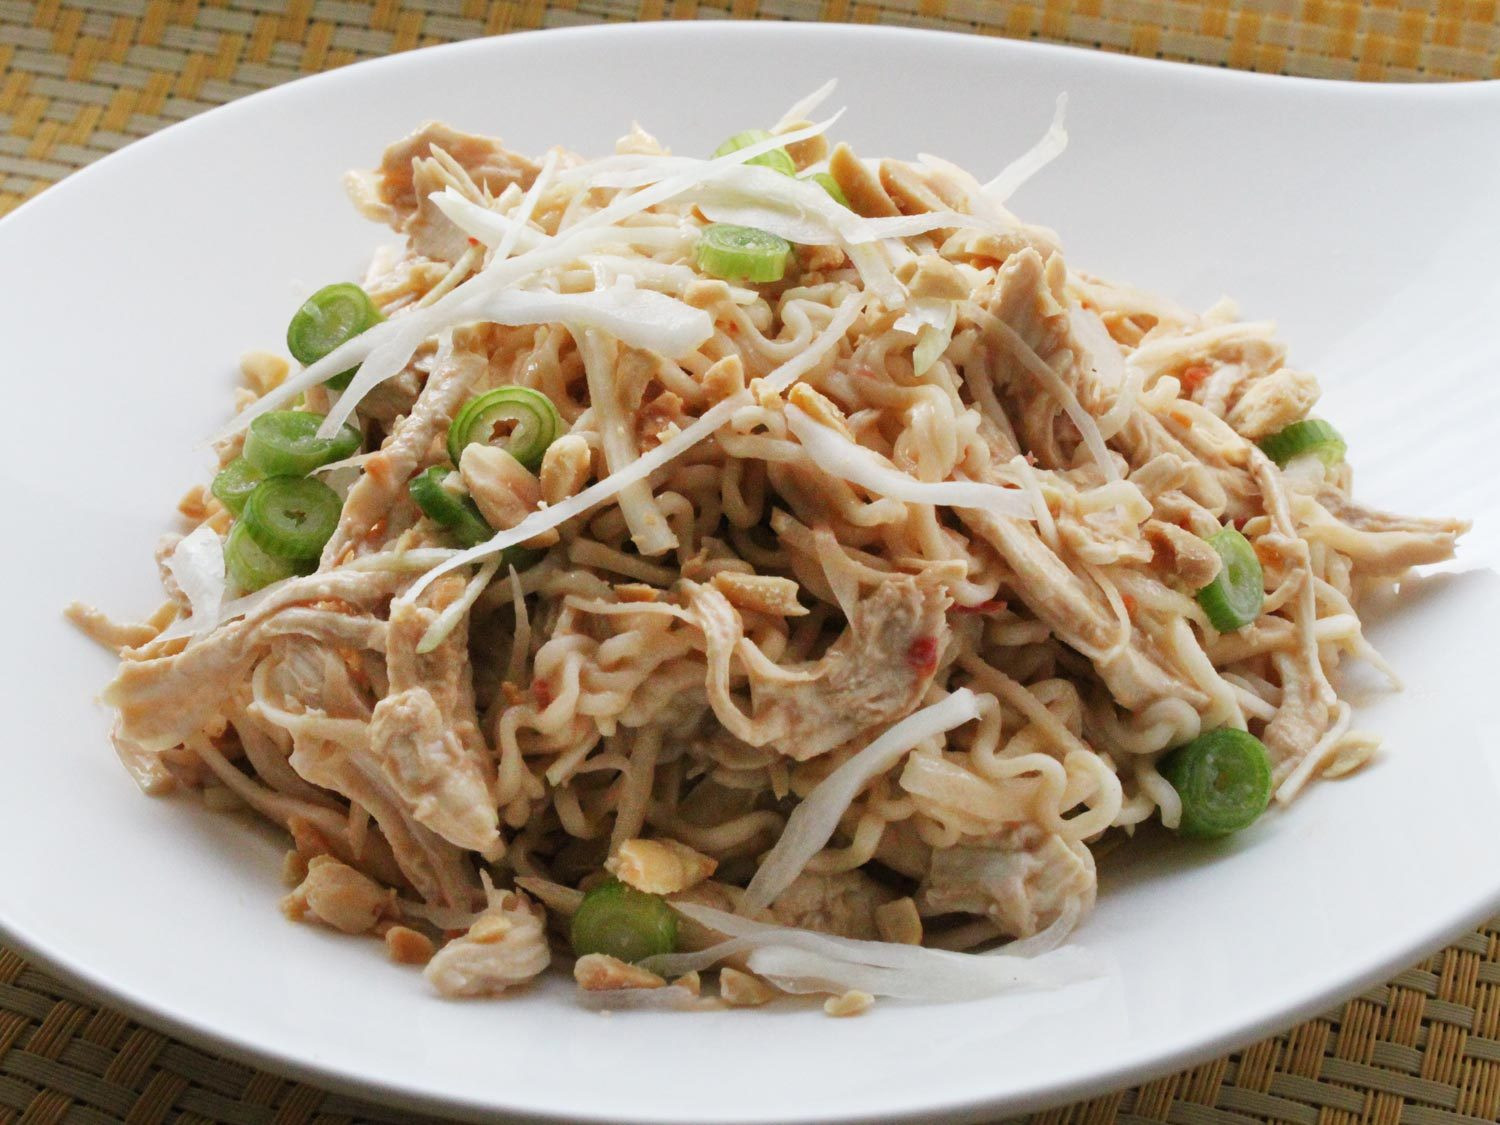 Chinese Noodles Recipe With Chicken
 Easy Cold Sesame Noodles With Shredded Chicken Recipe